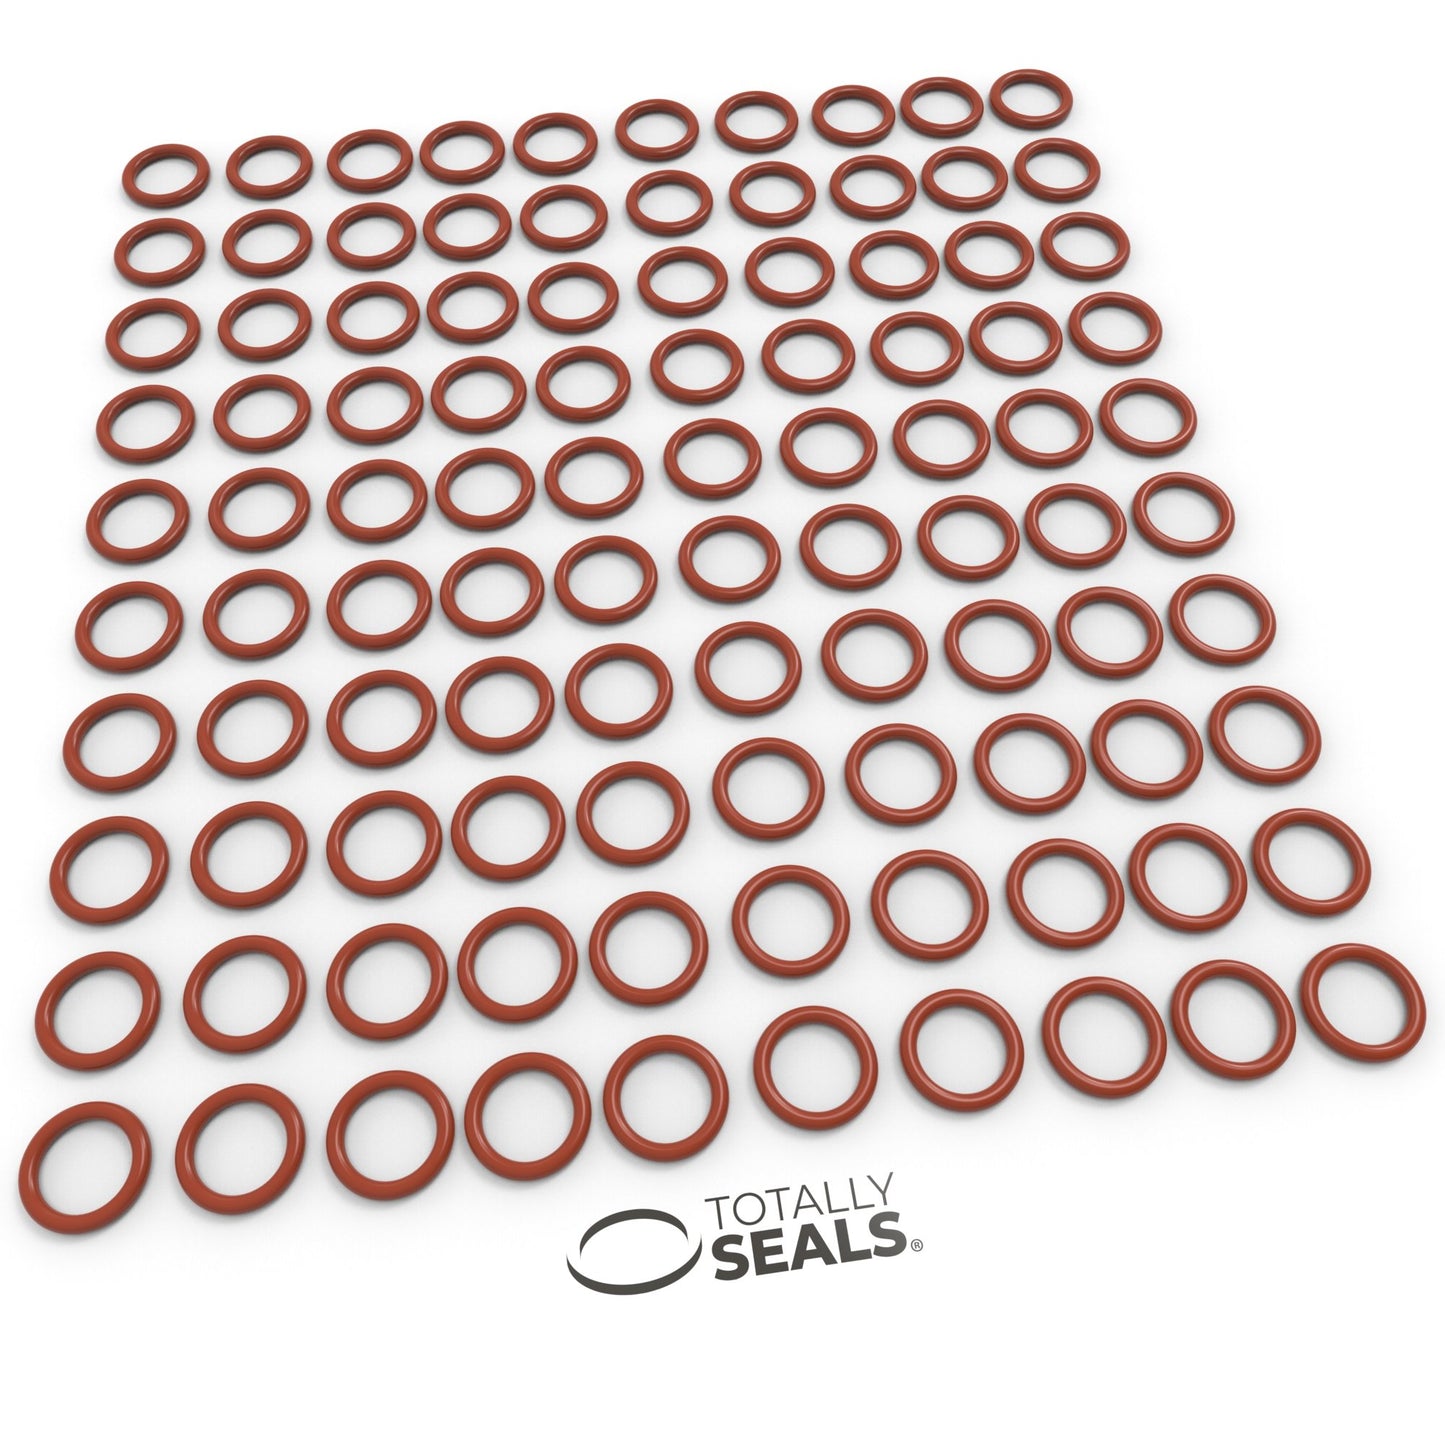 30mm x 2.5mm (35mm OD) Silicone O-Rings - Totally Seals®